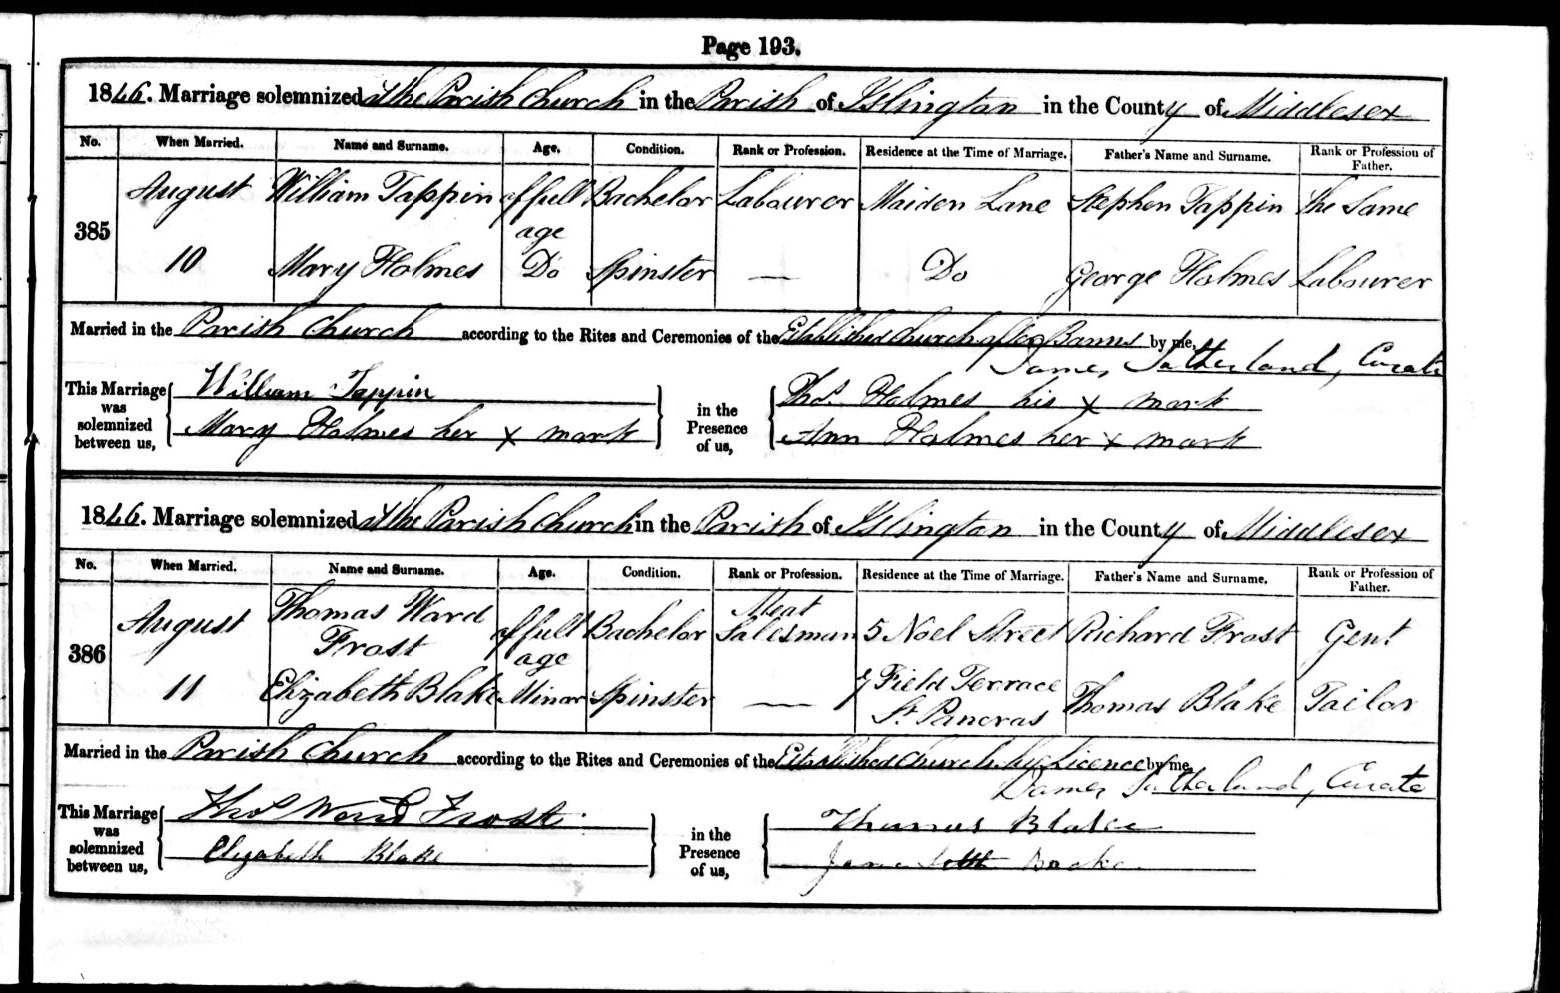 1846 marriage of Mary Holmes to William Tappin